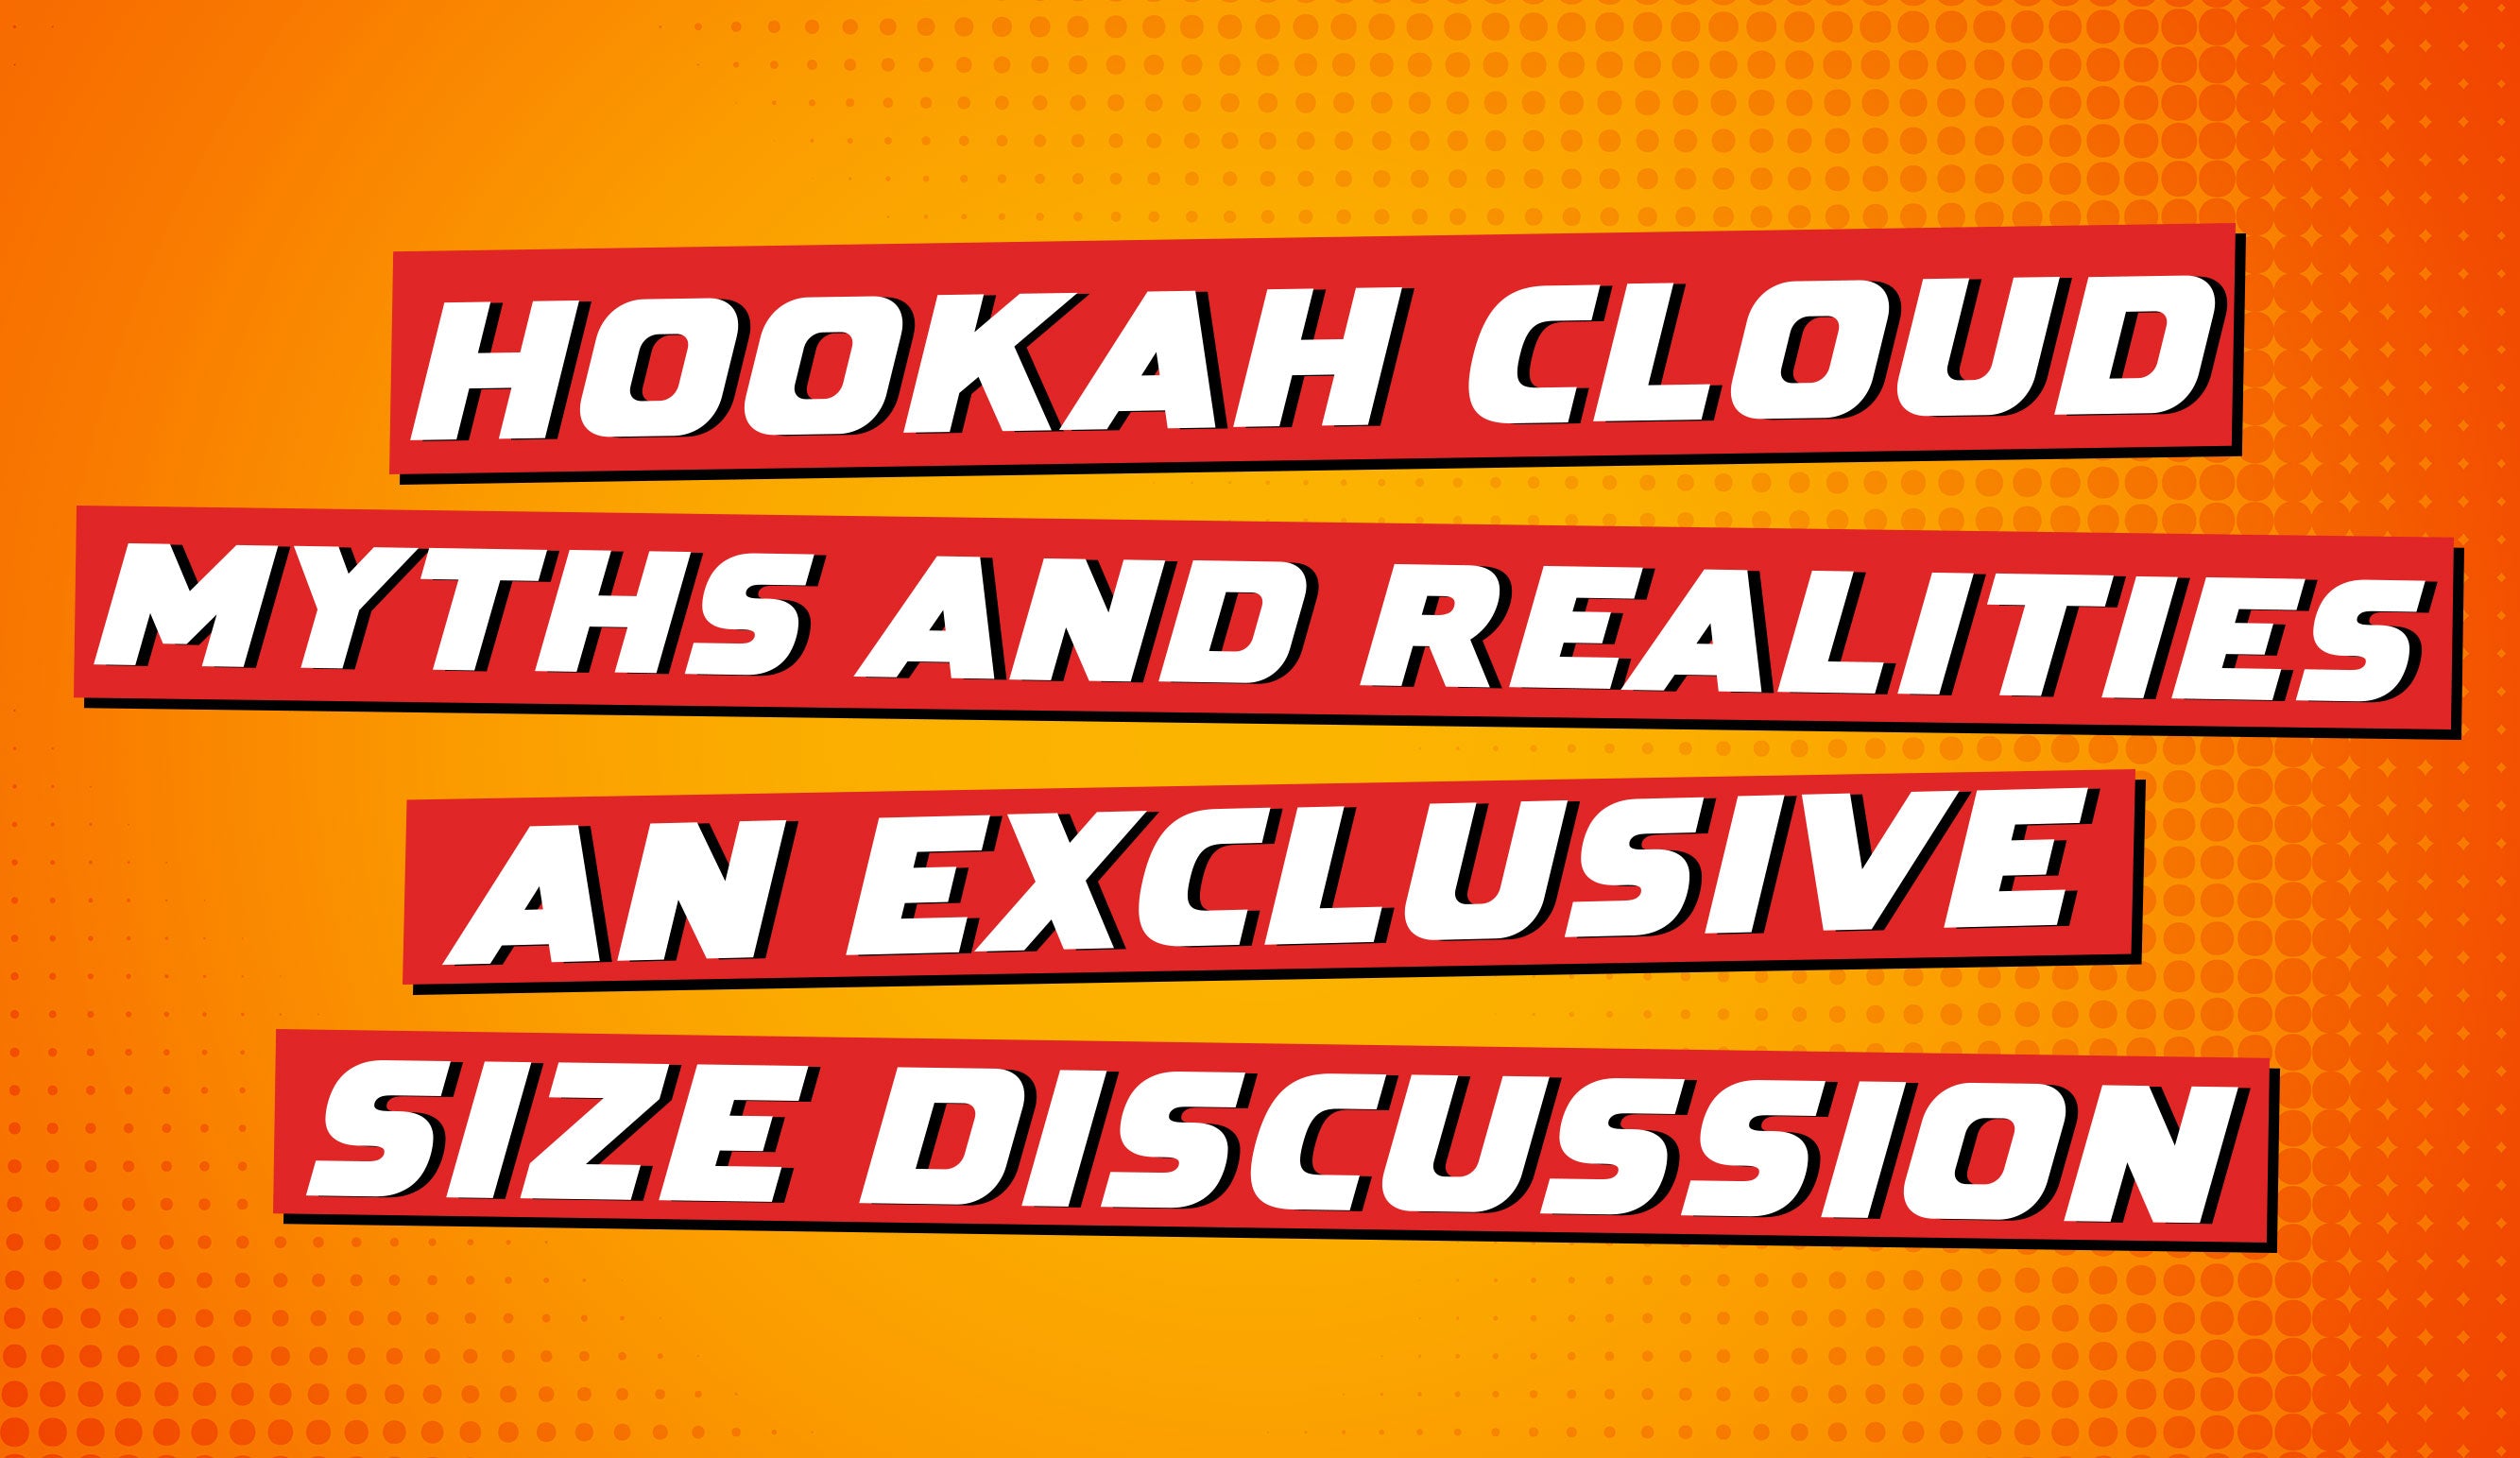 Hookah Cloud Myths and Realities: An Exclusive Size Discussion